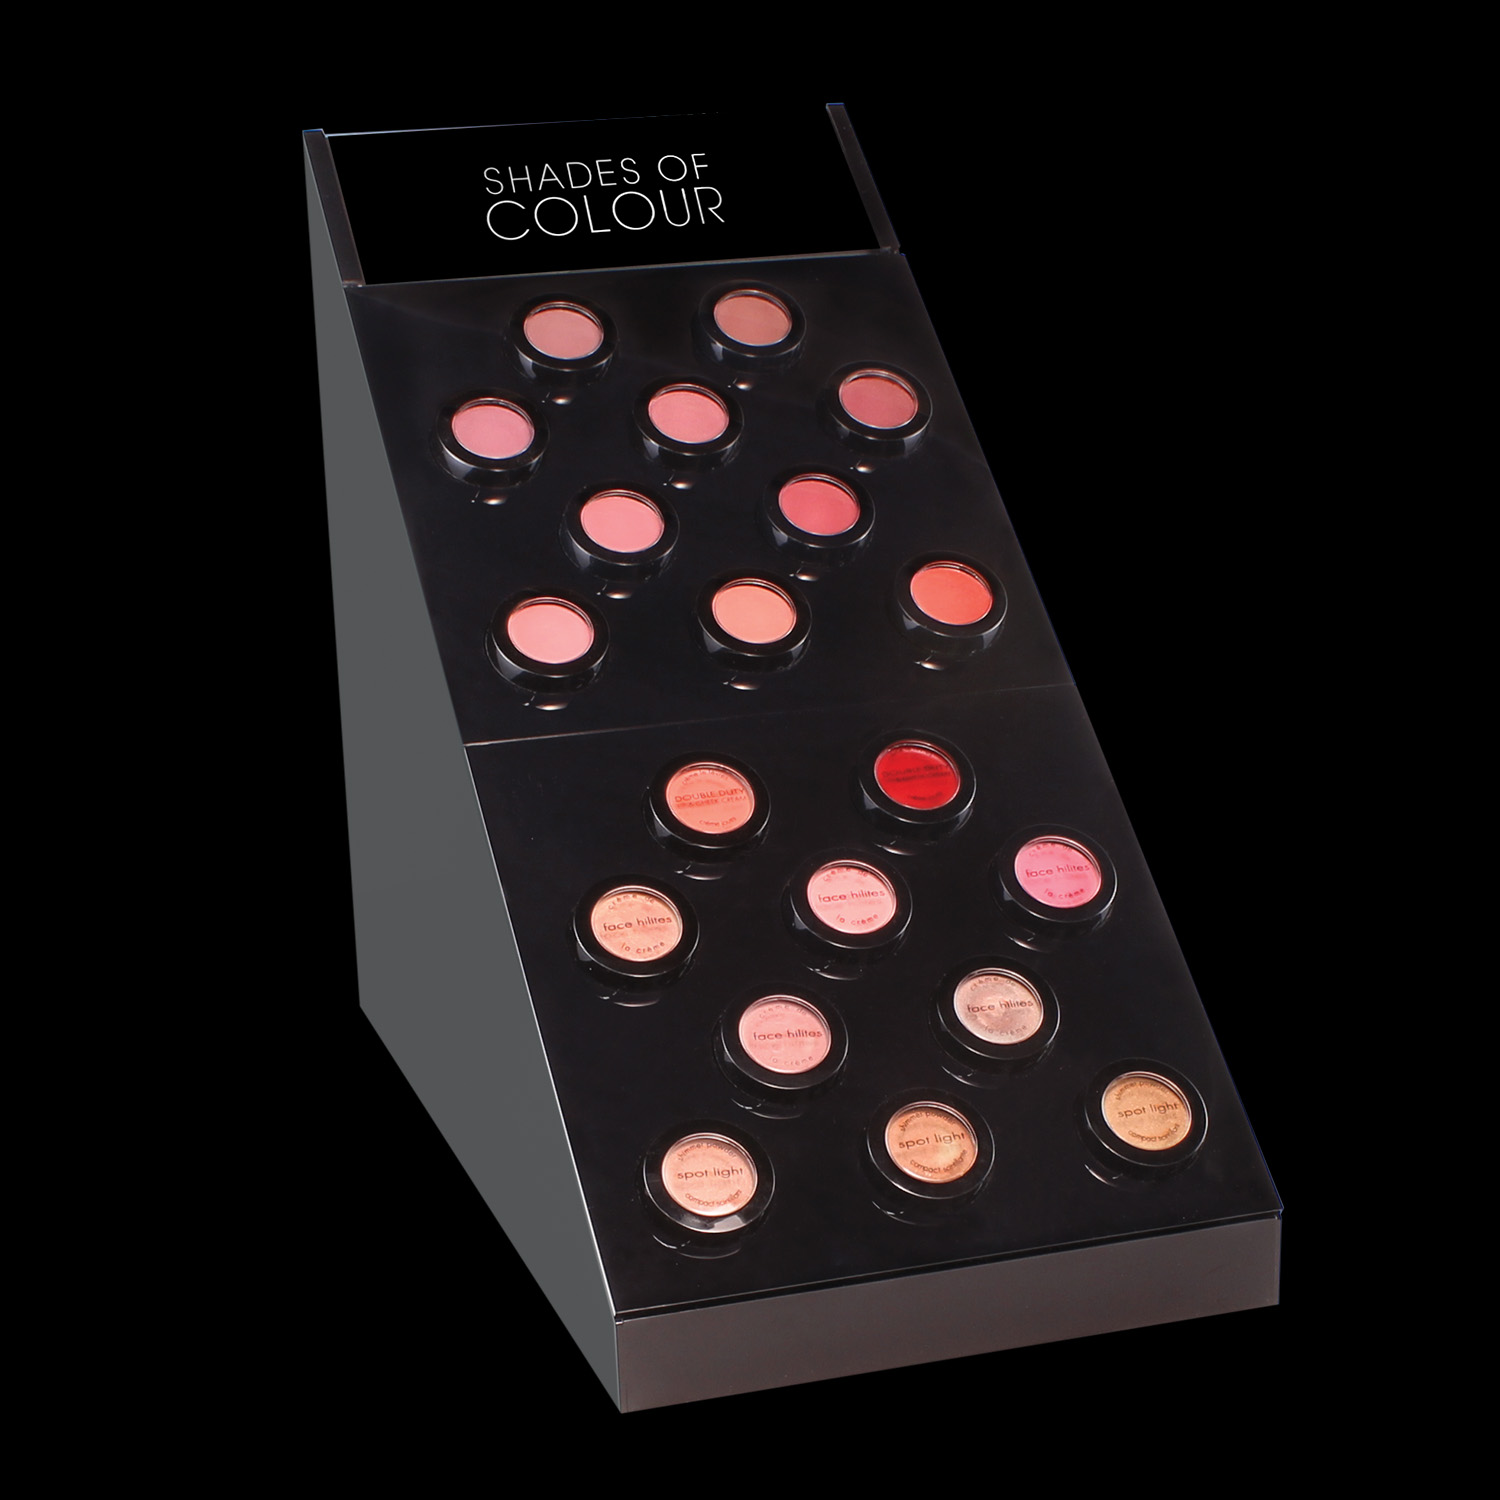 Classic packaging Visionary cheek displays to create an exquisite retail environment with ease